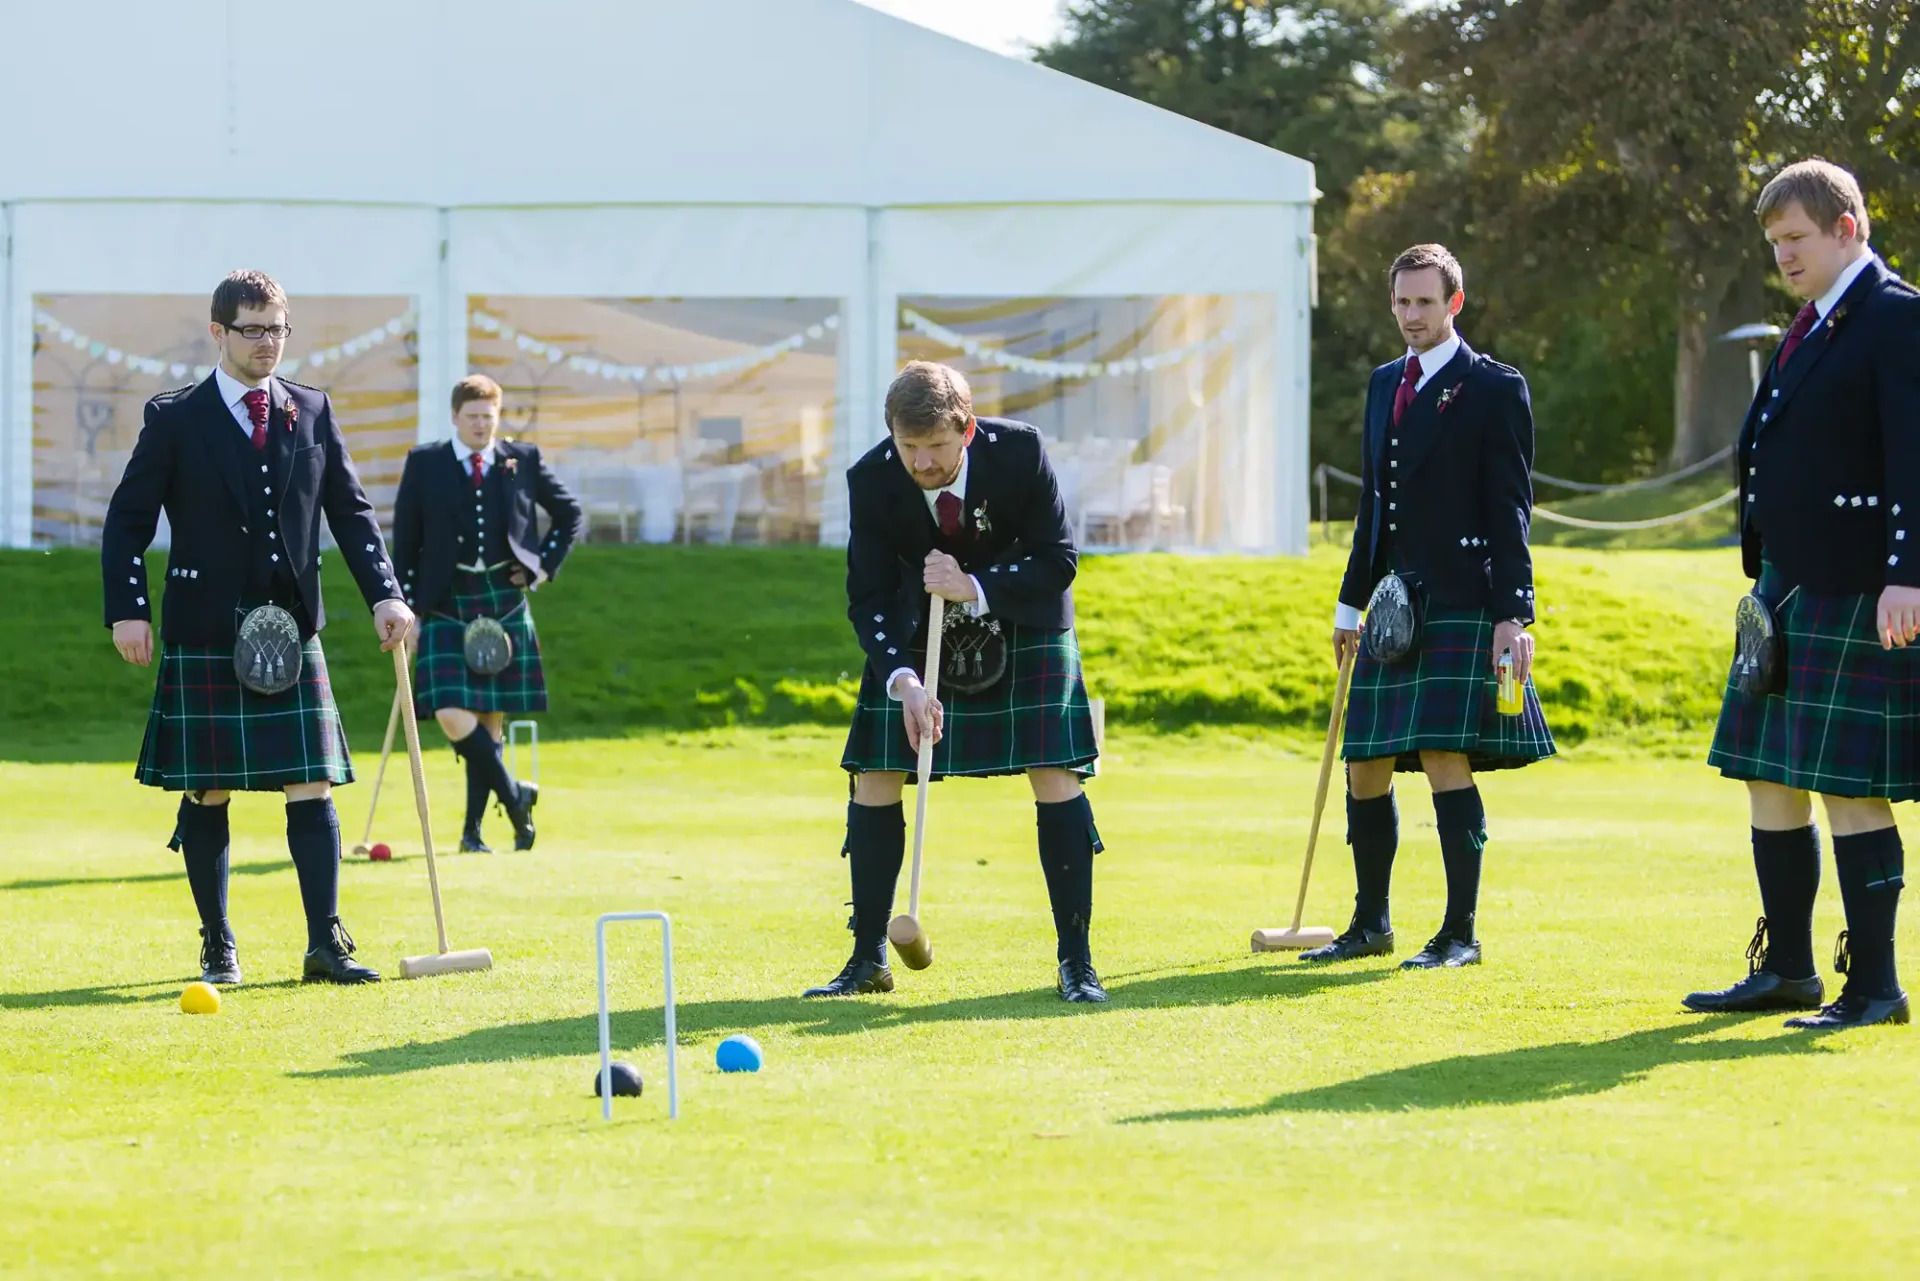 Four men in traditional kilts playing croquet on a sunny, grassy field, with one actively taking a shot while the others watch.